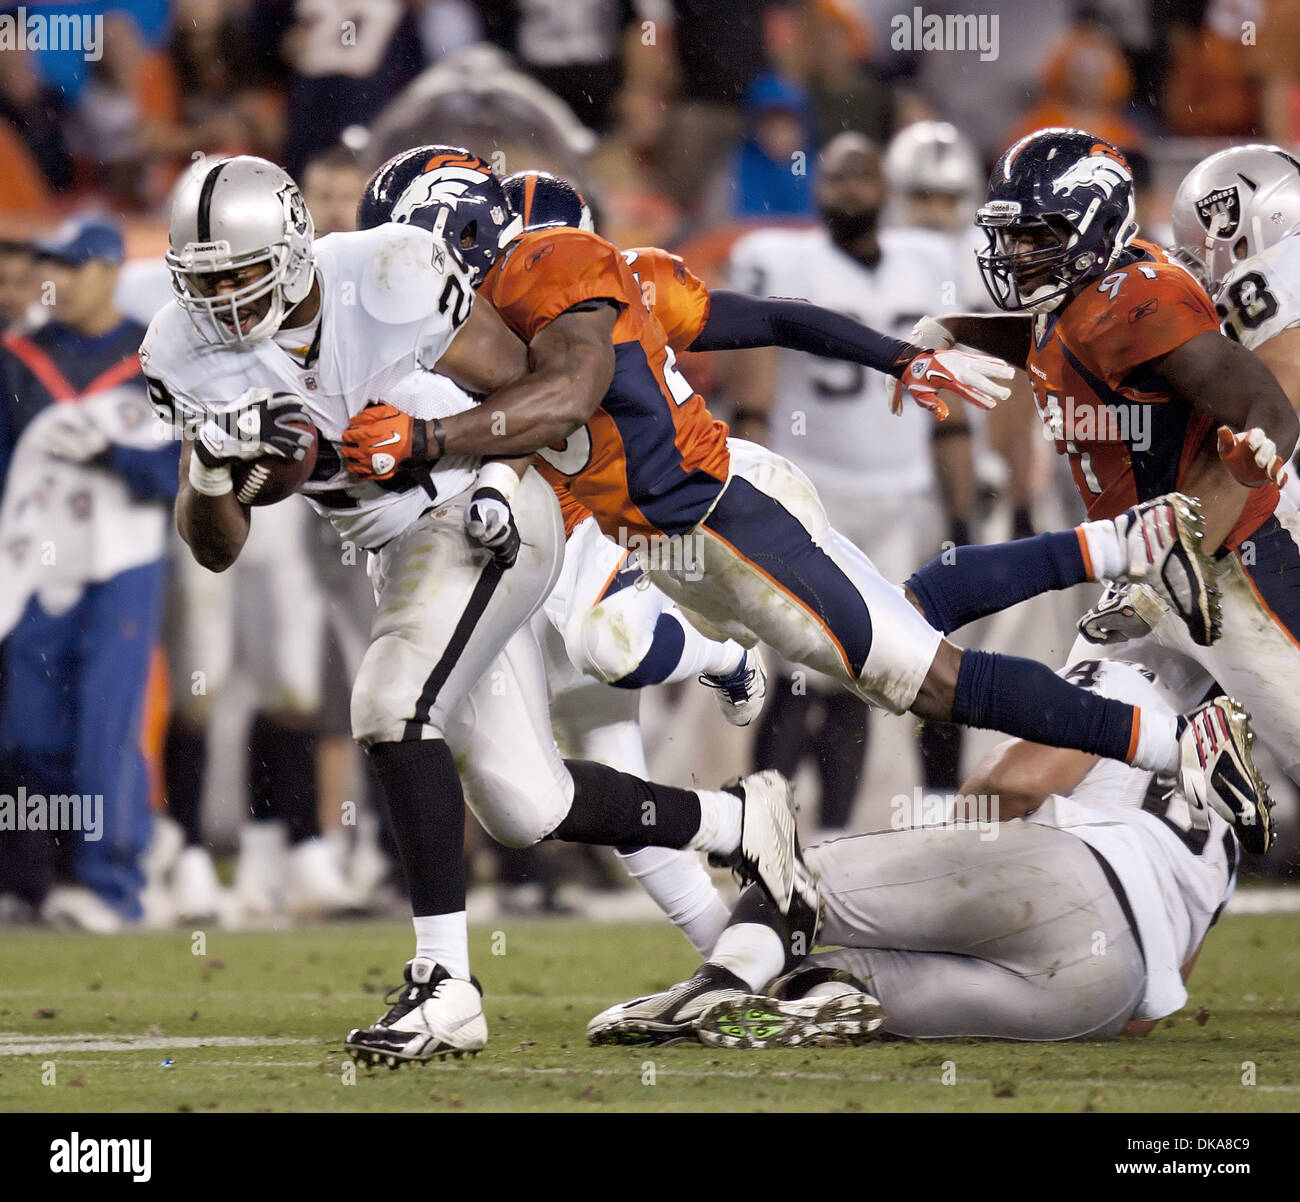 Sep. 12, 2011 - Denver, Colorado, U.S. - Raiders RB MICHAEL BUSH gets tackled from behind by Broncos S. BRIAN DAWKINS, right, during the 2nd half Monday night at Sports Authority Field at Mile High. The Oakland Raiders defeated the Denver Broncos 23-20. (Credit Image: © Hector Acevedo/ZUMAPRESS.com) Stock Photo